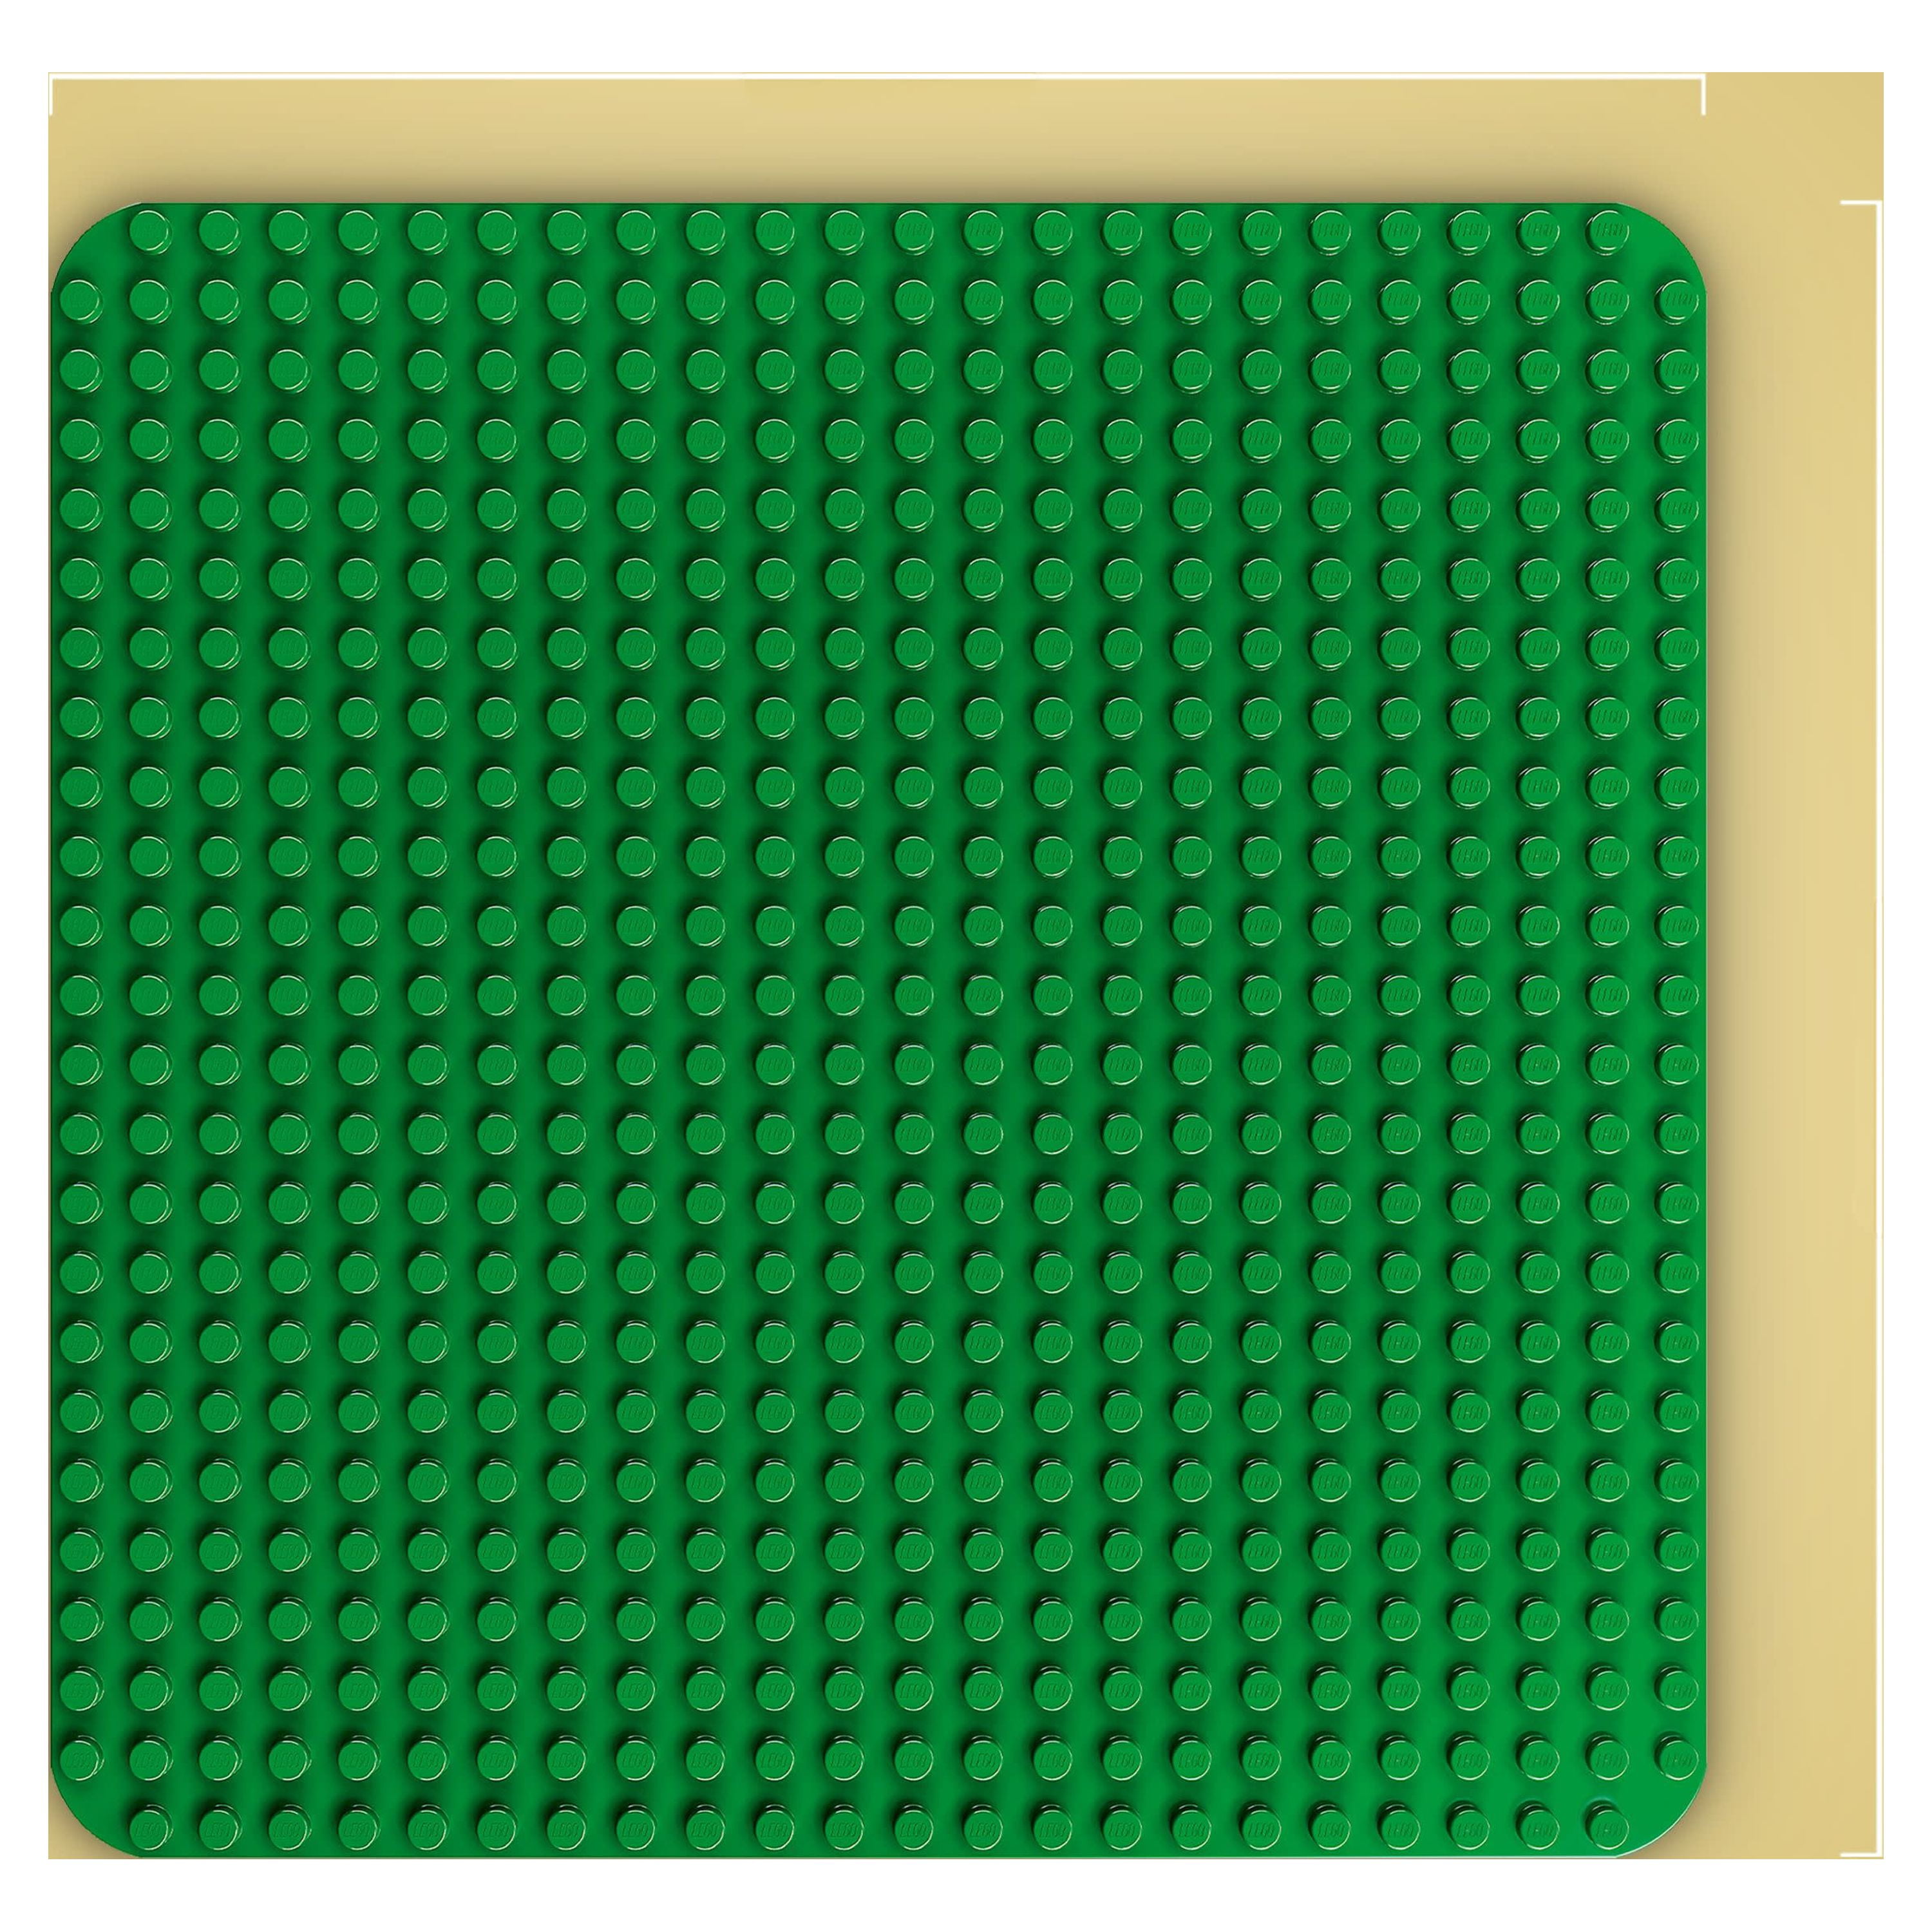 LEGO DUPLO Green Building Base Plate 10980, Construction Toy for